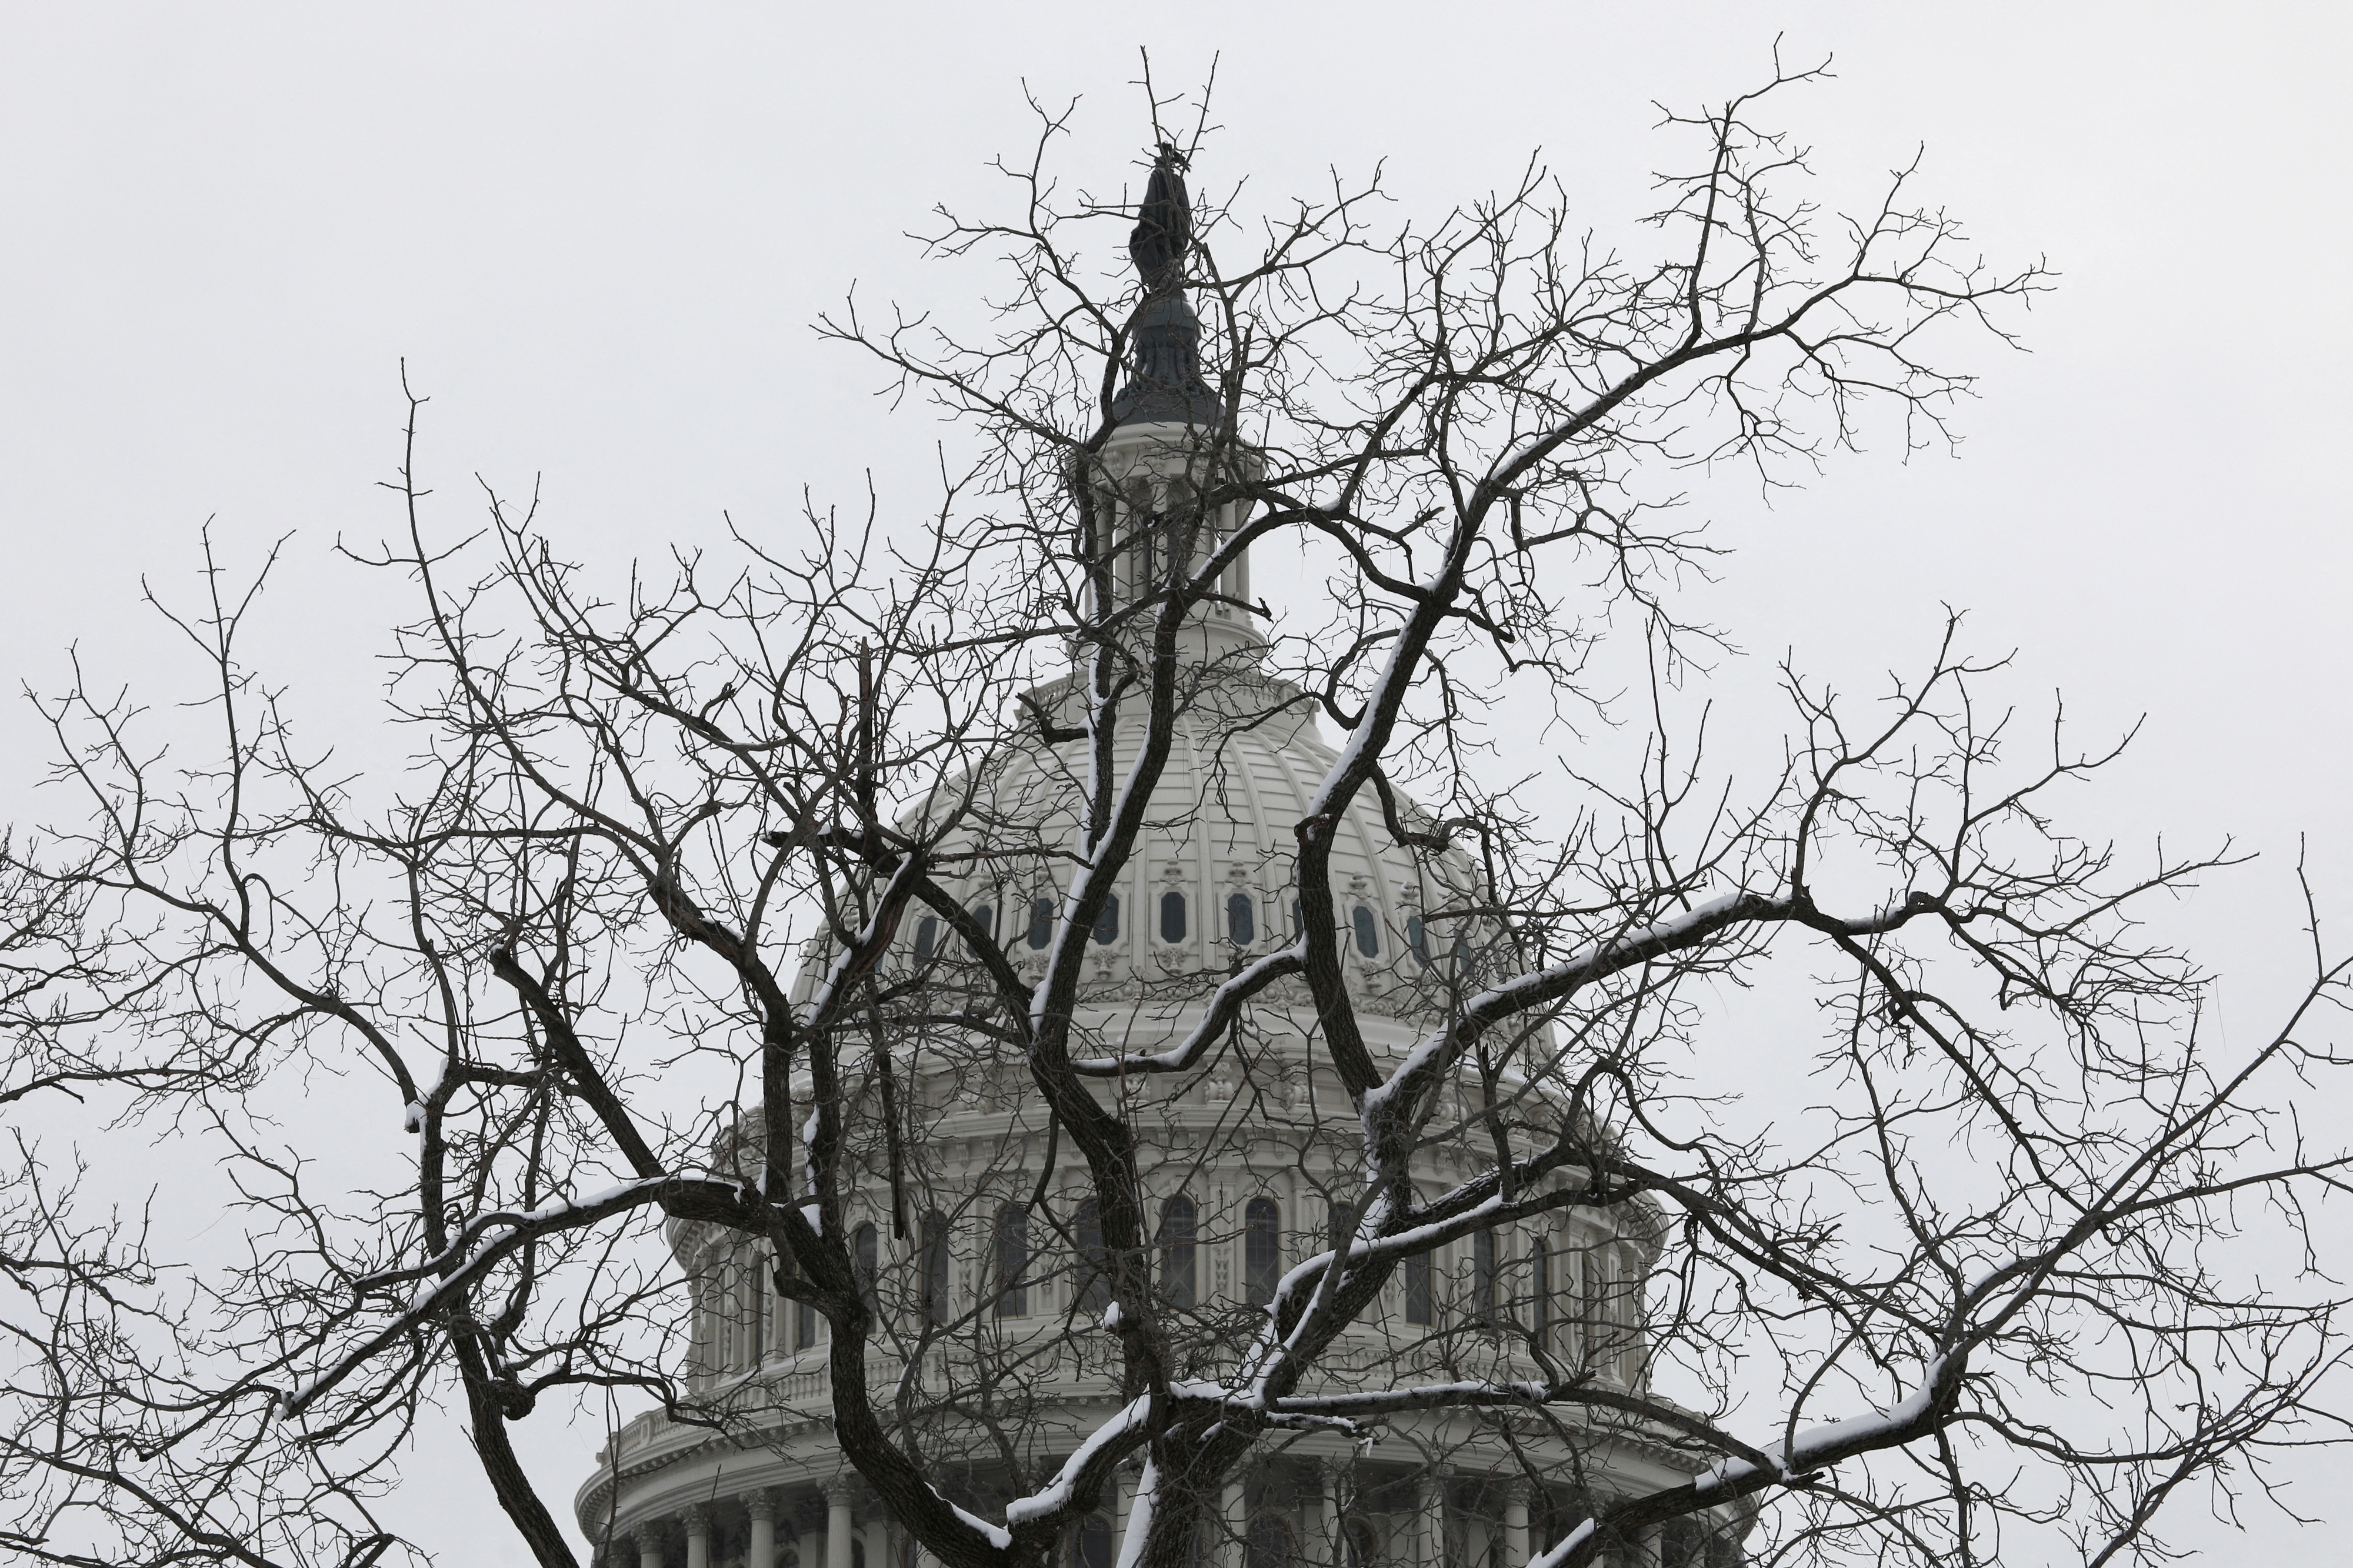 The Capitol Building is seen before a snow-covered tree on the eve of the first anniversary of the January 6, 2021 attack on the U.S. Capitol